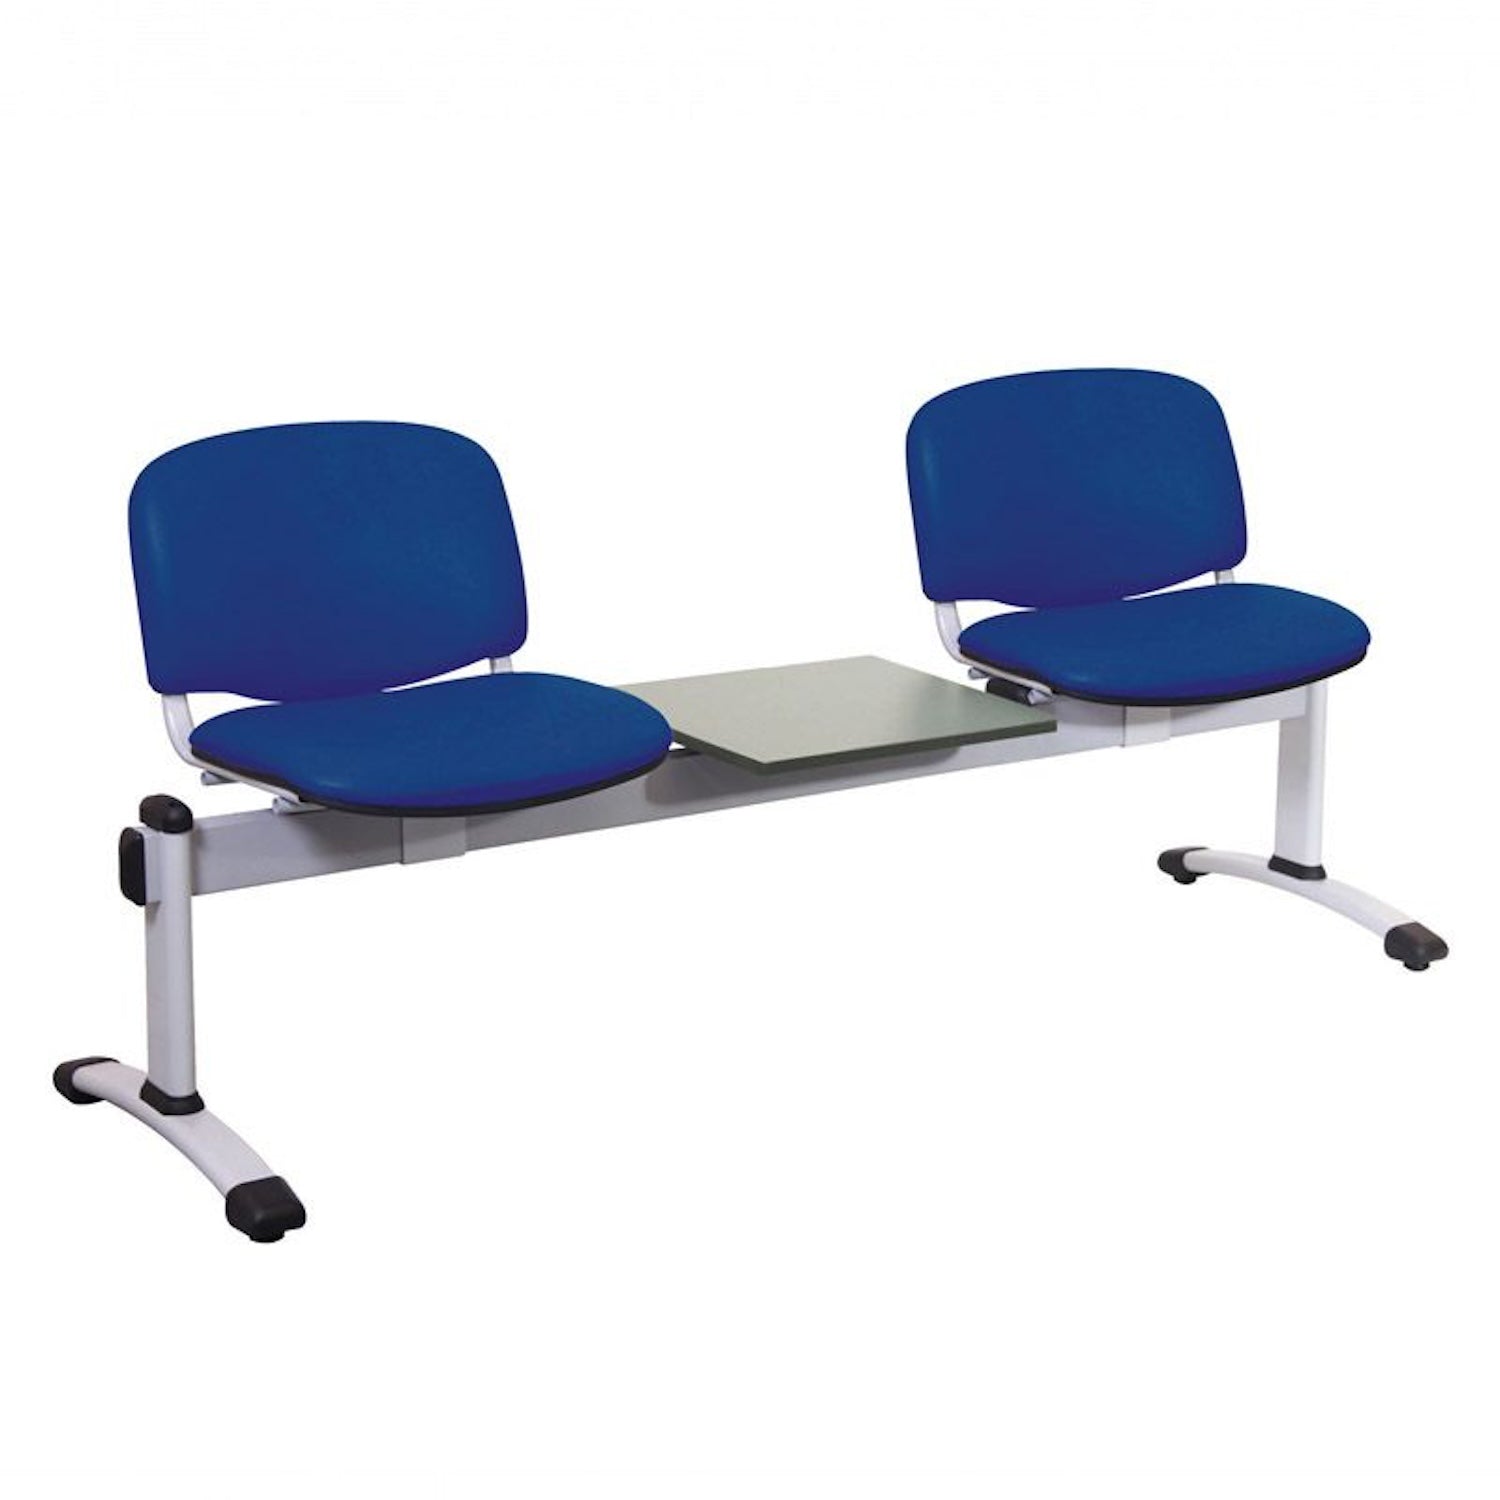 Sunflower Visitor 2 Anti-bacterial Vinyl Upholstery Seats & 1 Table Module in Navy